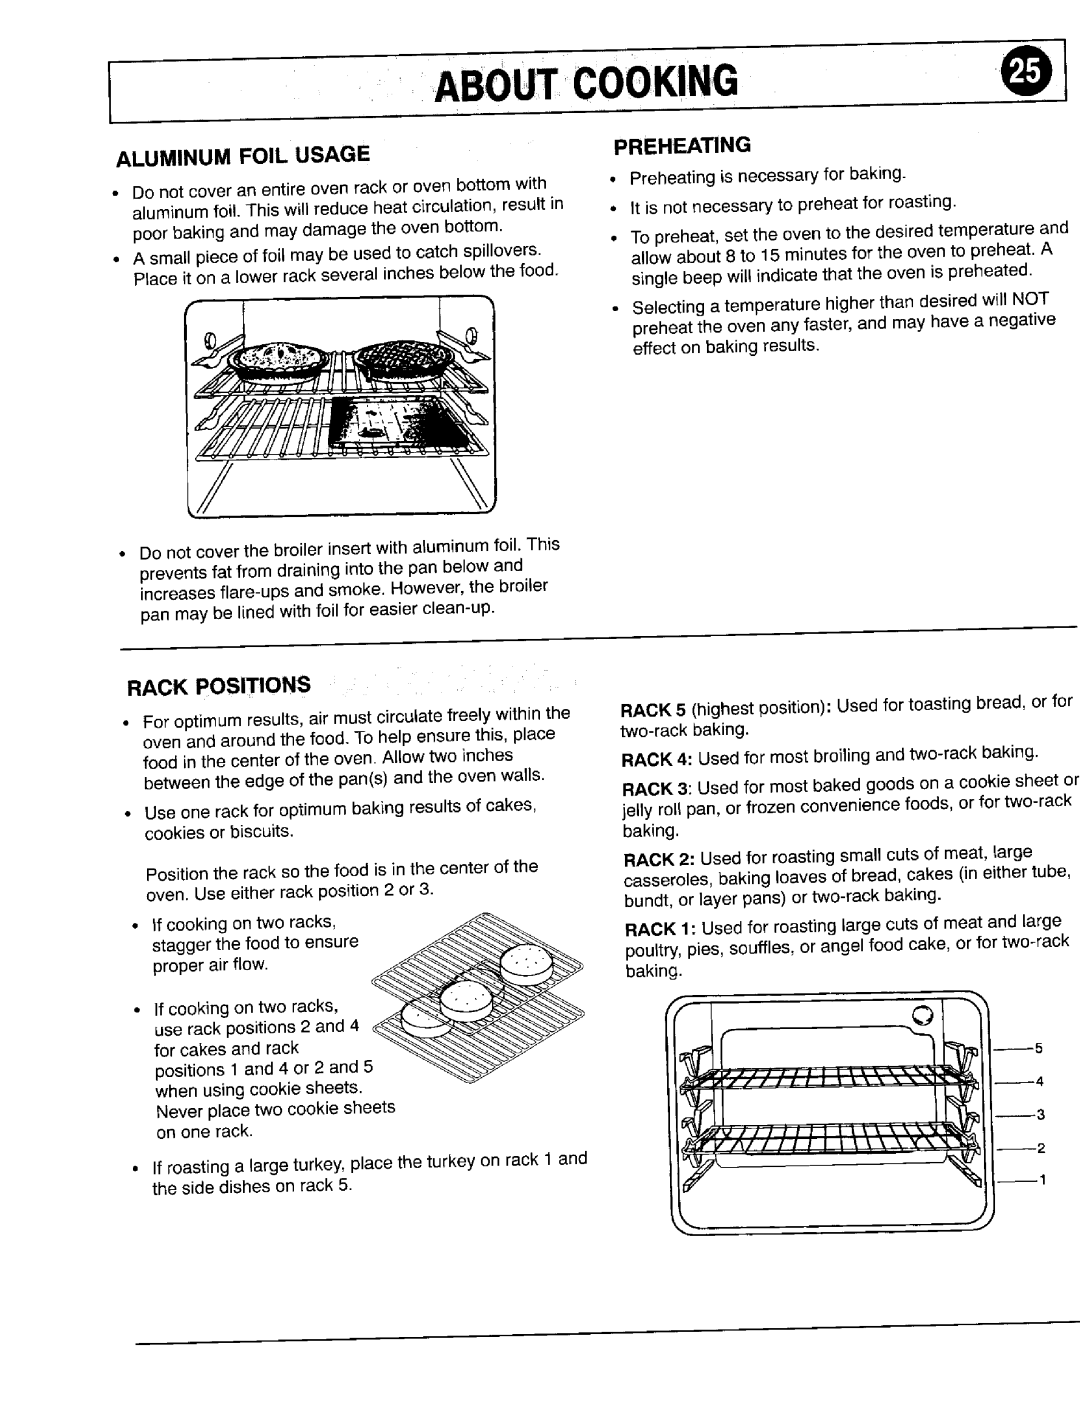 Maytag 8111P375-60 important safety instructions Aluminum Foil Usage, Preheating, Rack Positions, Iaboutcooking 